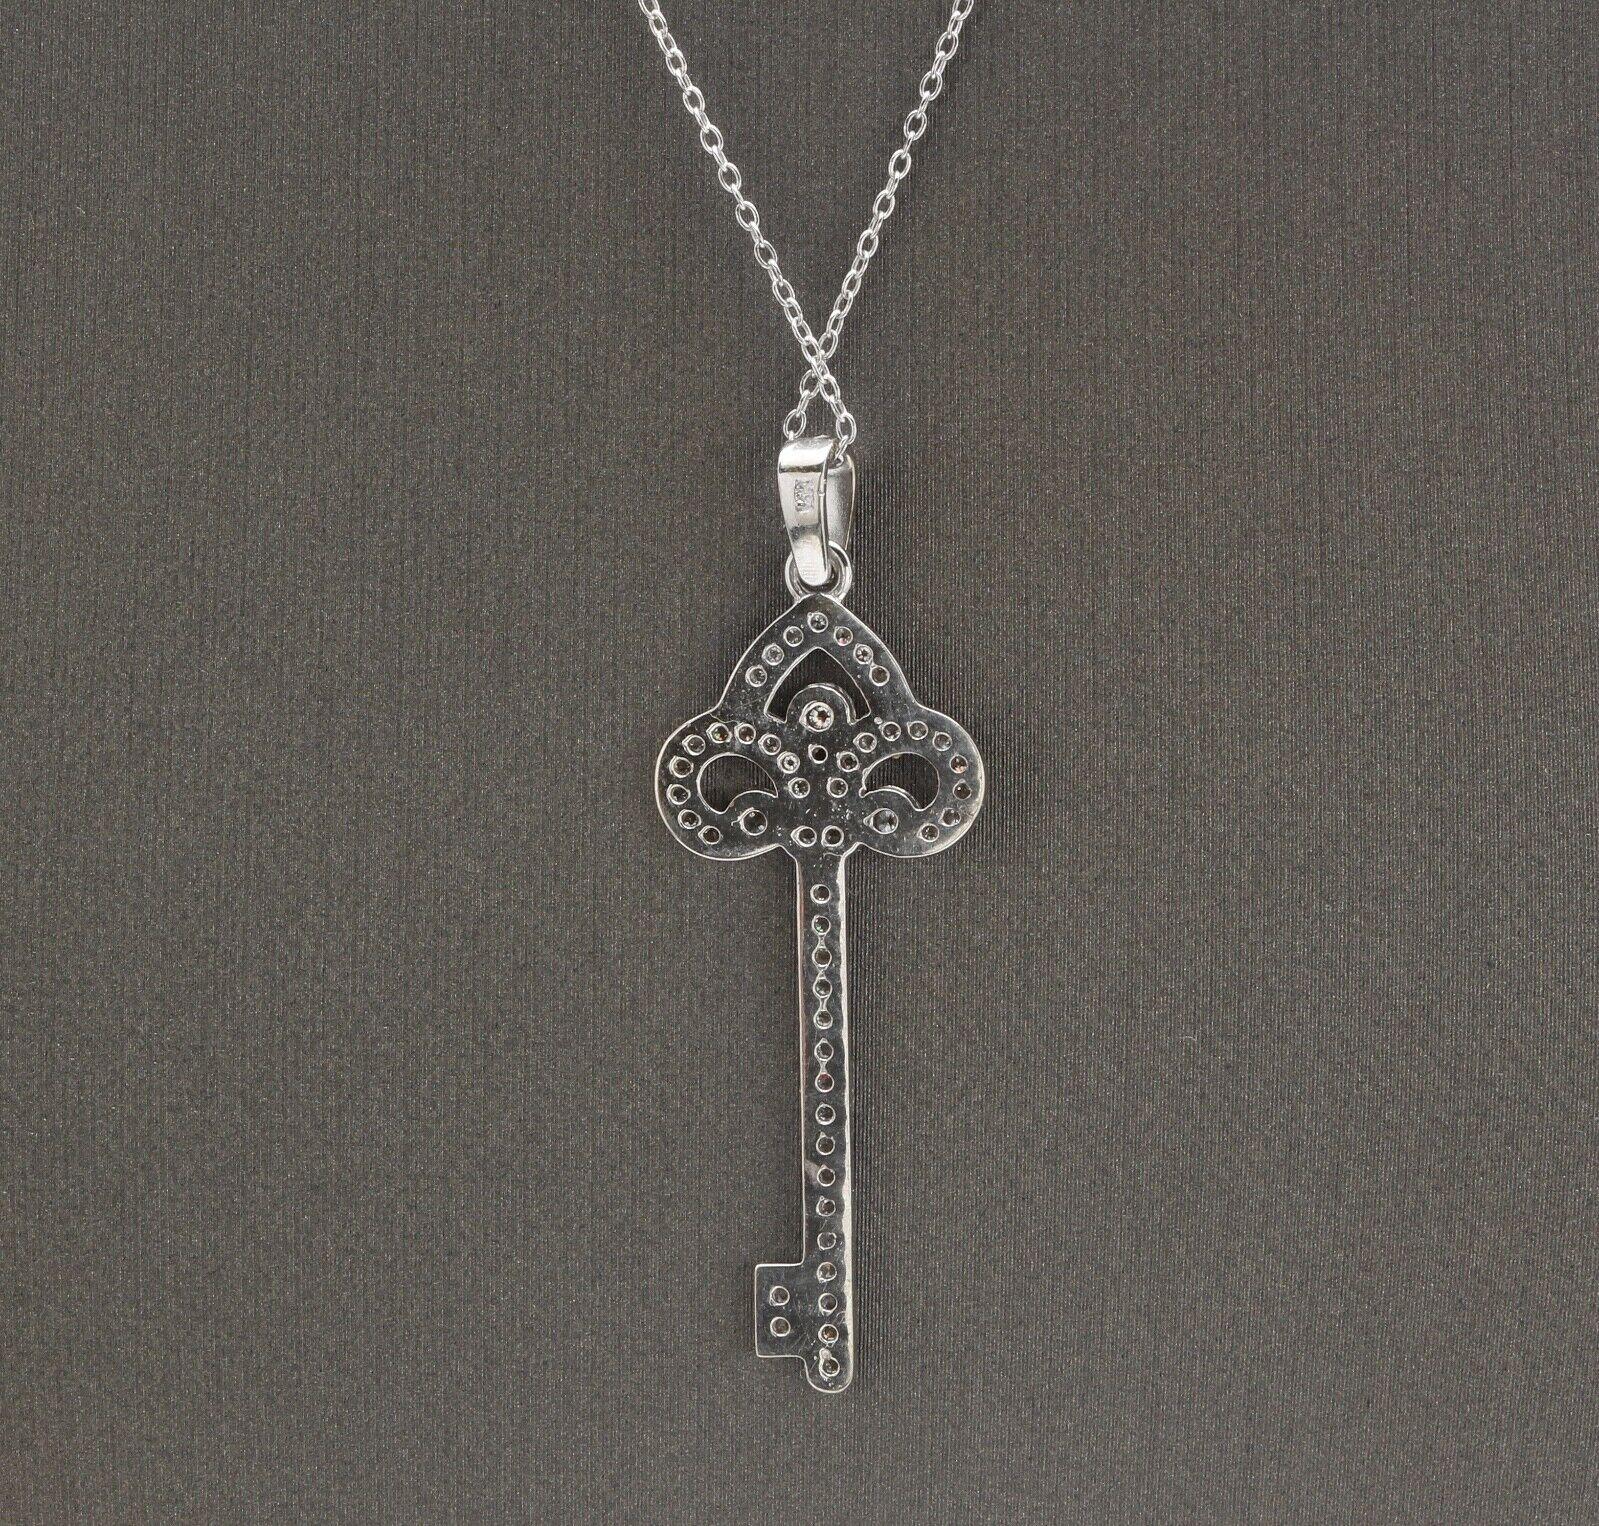 0.60Ct Splendid 14k Solid White Gold Key Pendant Necklace

Amazing looking piece! 

Stamped: 14k

Total Natural Round Diamond Weight is: Approx. 0.60 Carats (G-H / SI)

Chain Length is: 18 inches (can adjusted to 16